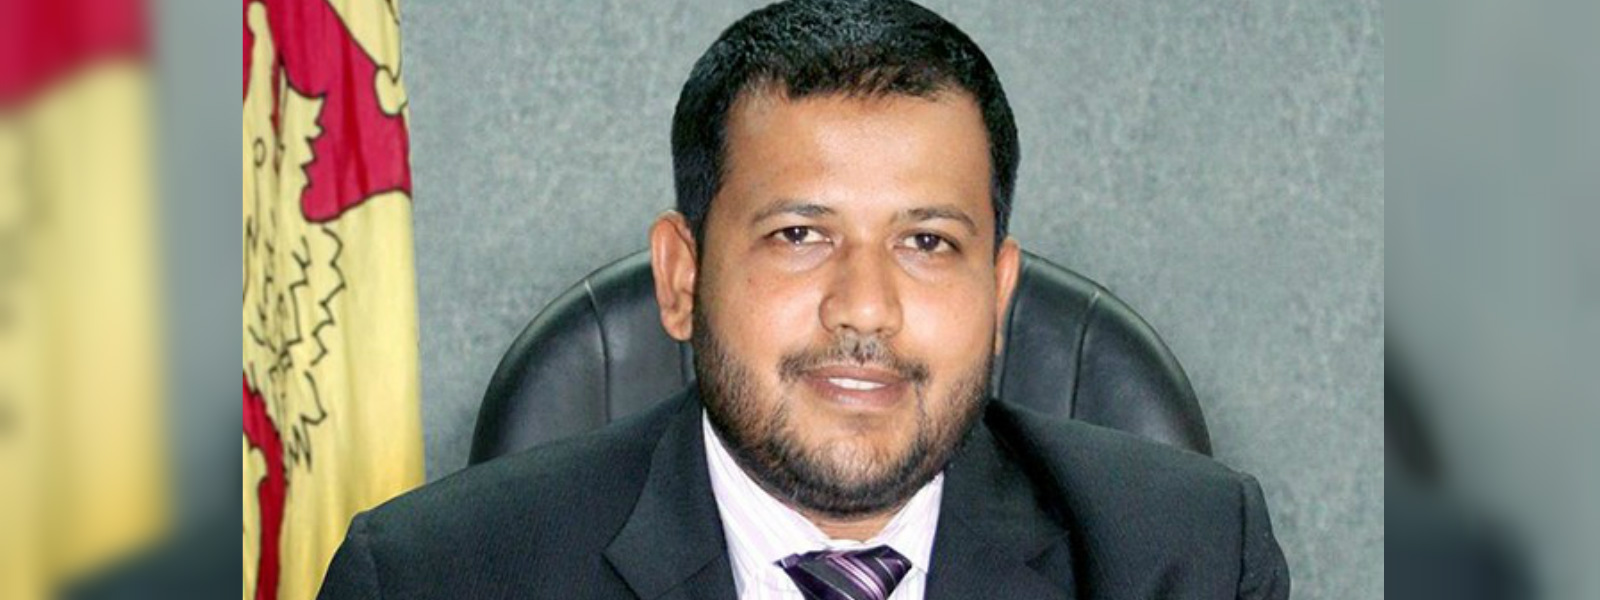 No-confidence motion against Bathiudeen